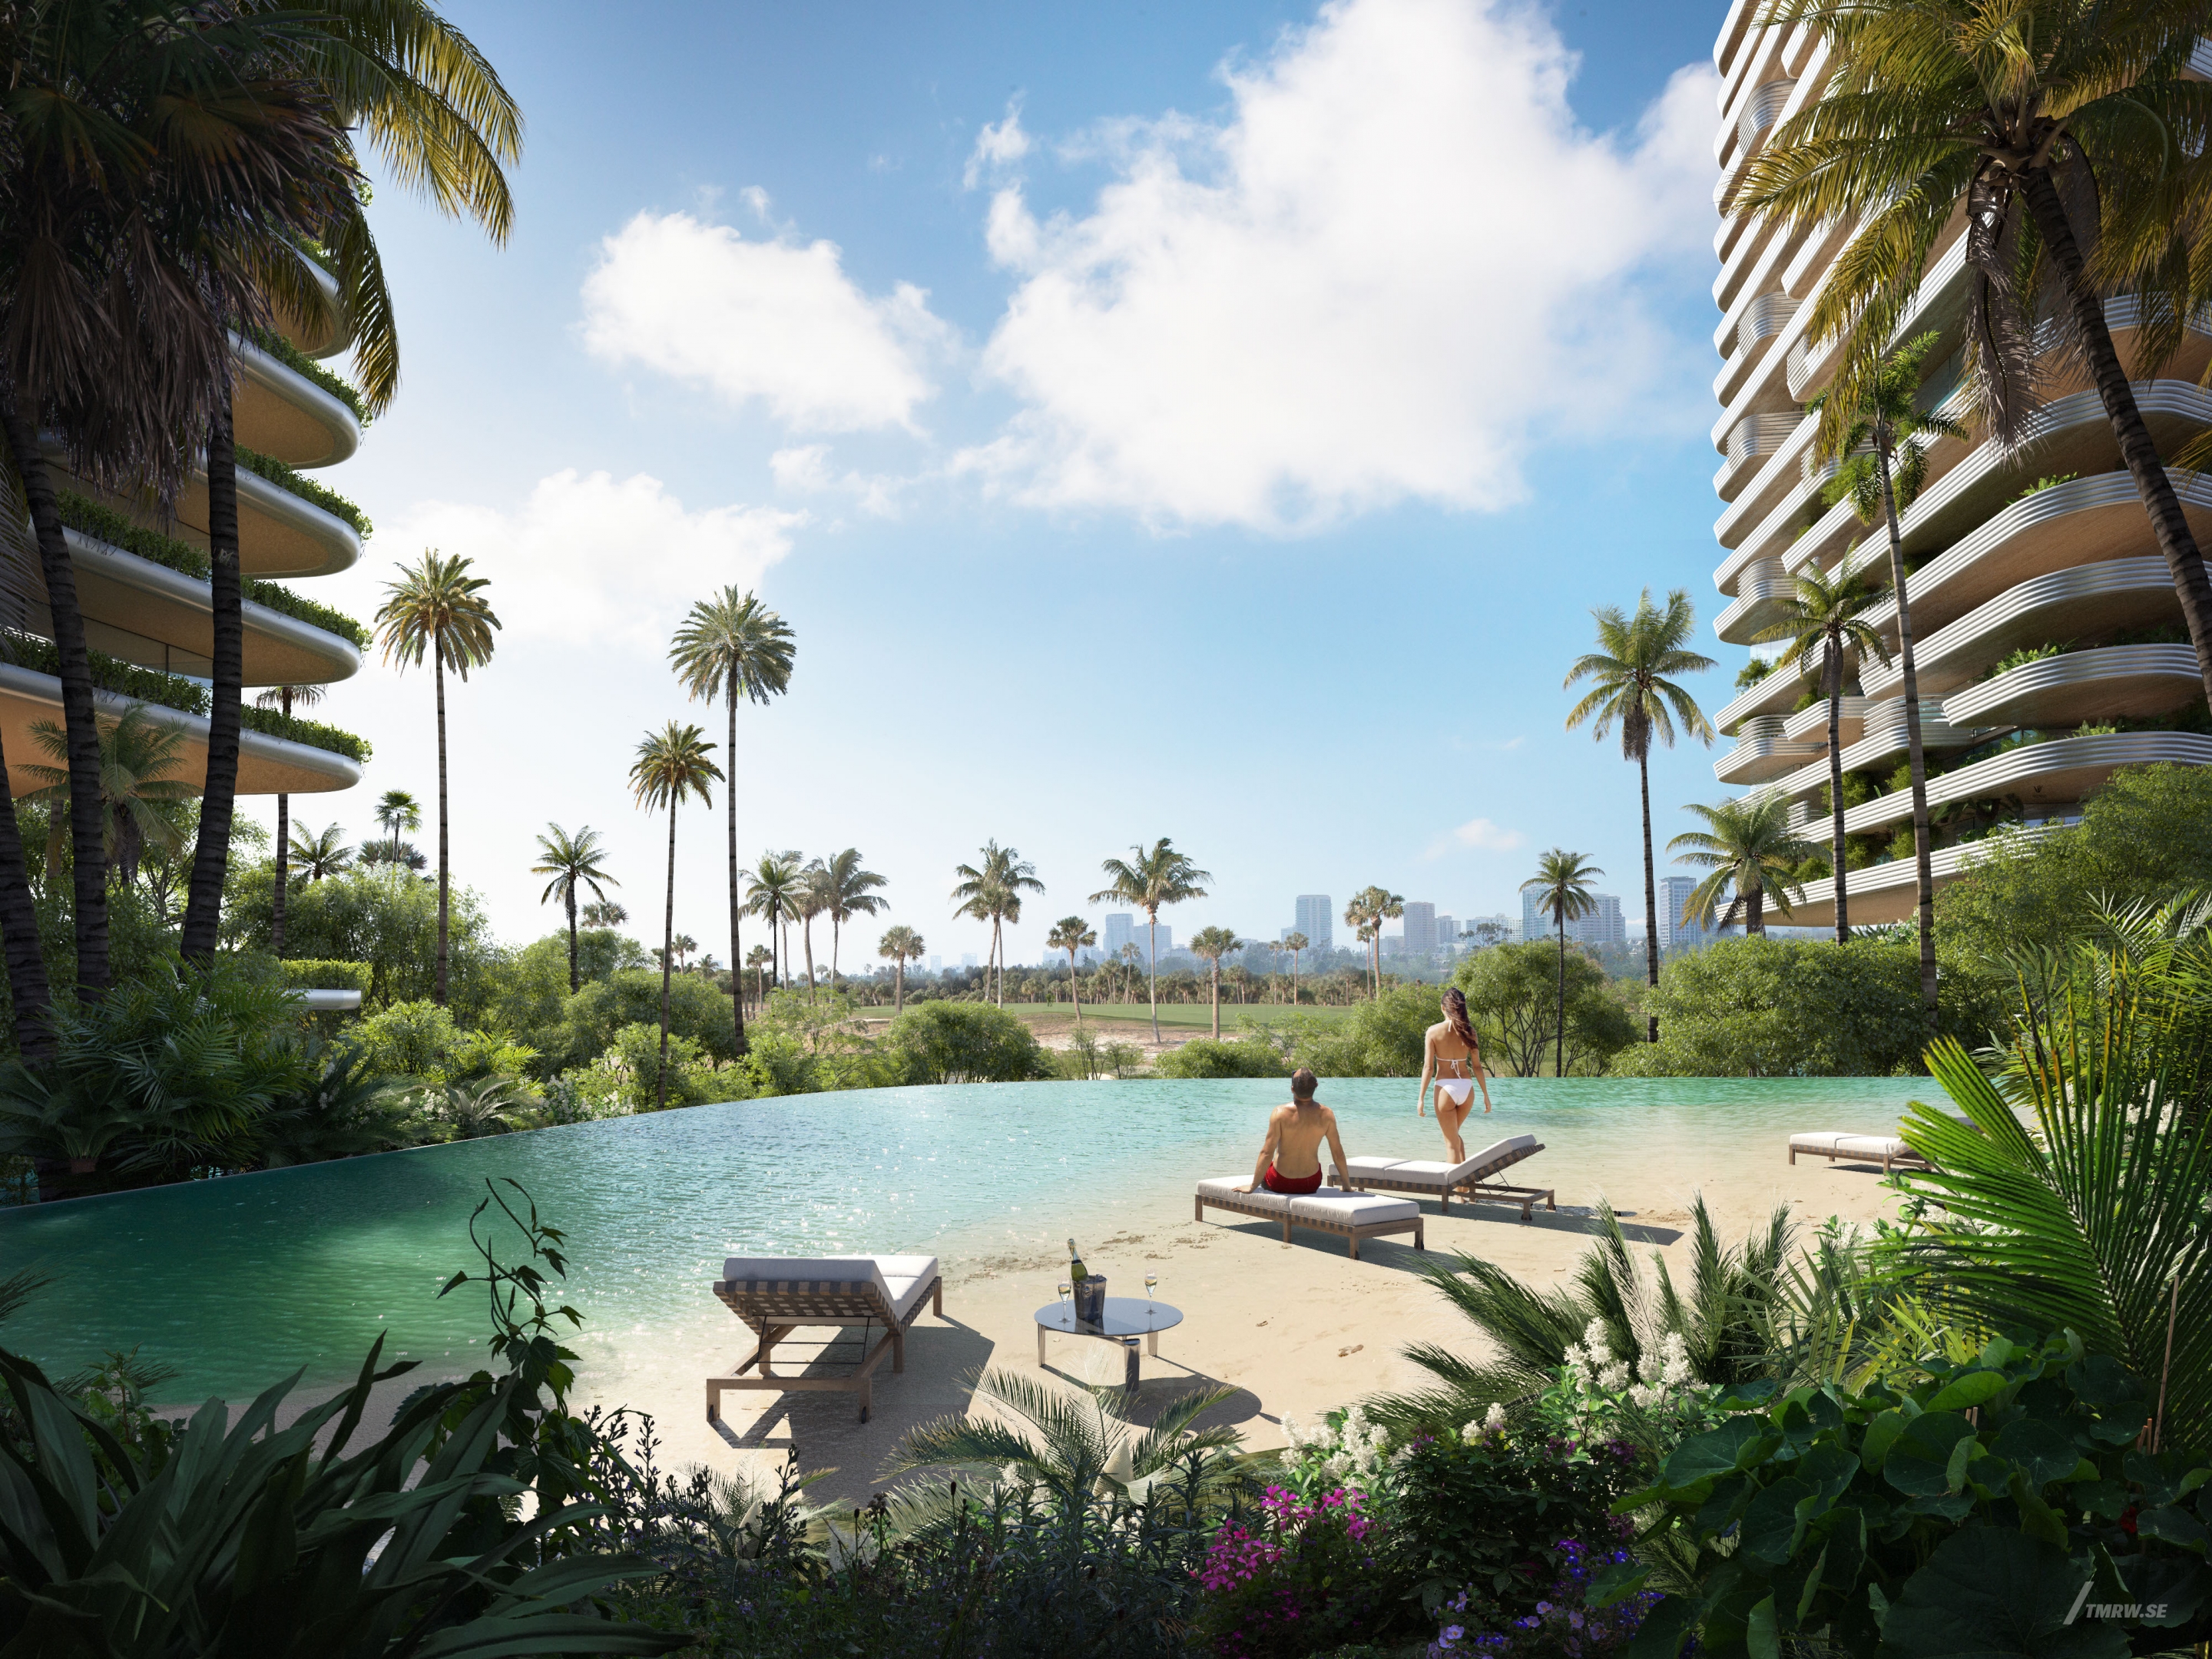 Architectural visualization of One Beverly Hills for Foster & Partners. An image of a backyard of a residential building. A sand beach with people sunbathing in daylight. Surrounded by palms.